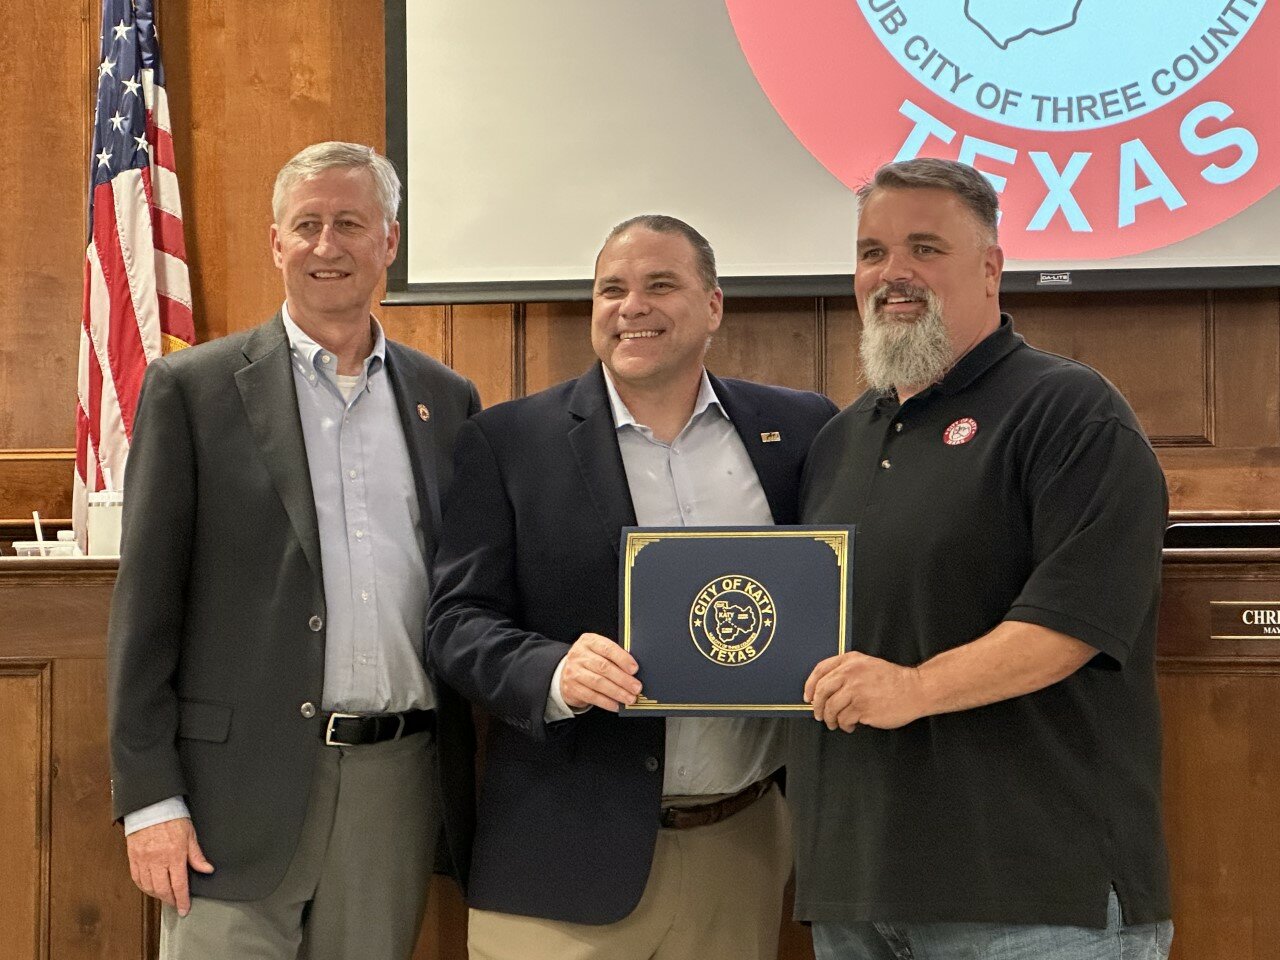 Katy ISD superintendent Ken Gregorski, center, accepts a proclamation from Mayor Dusty Thiele, left, and Ward B Council Member Rory Robertson in recognition of Teacher Appreciation Week.